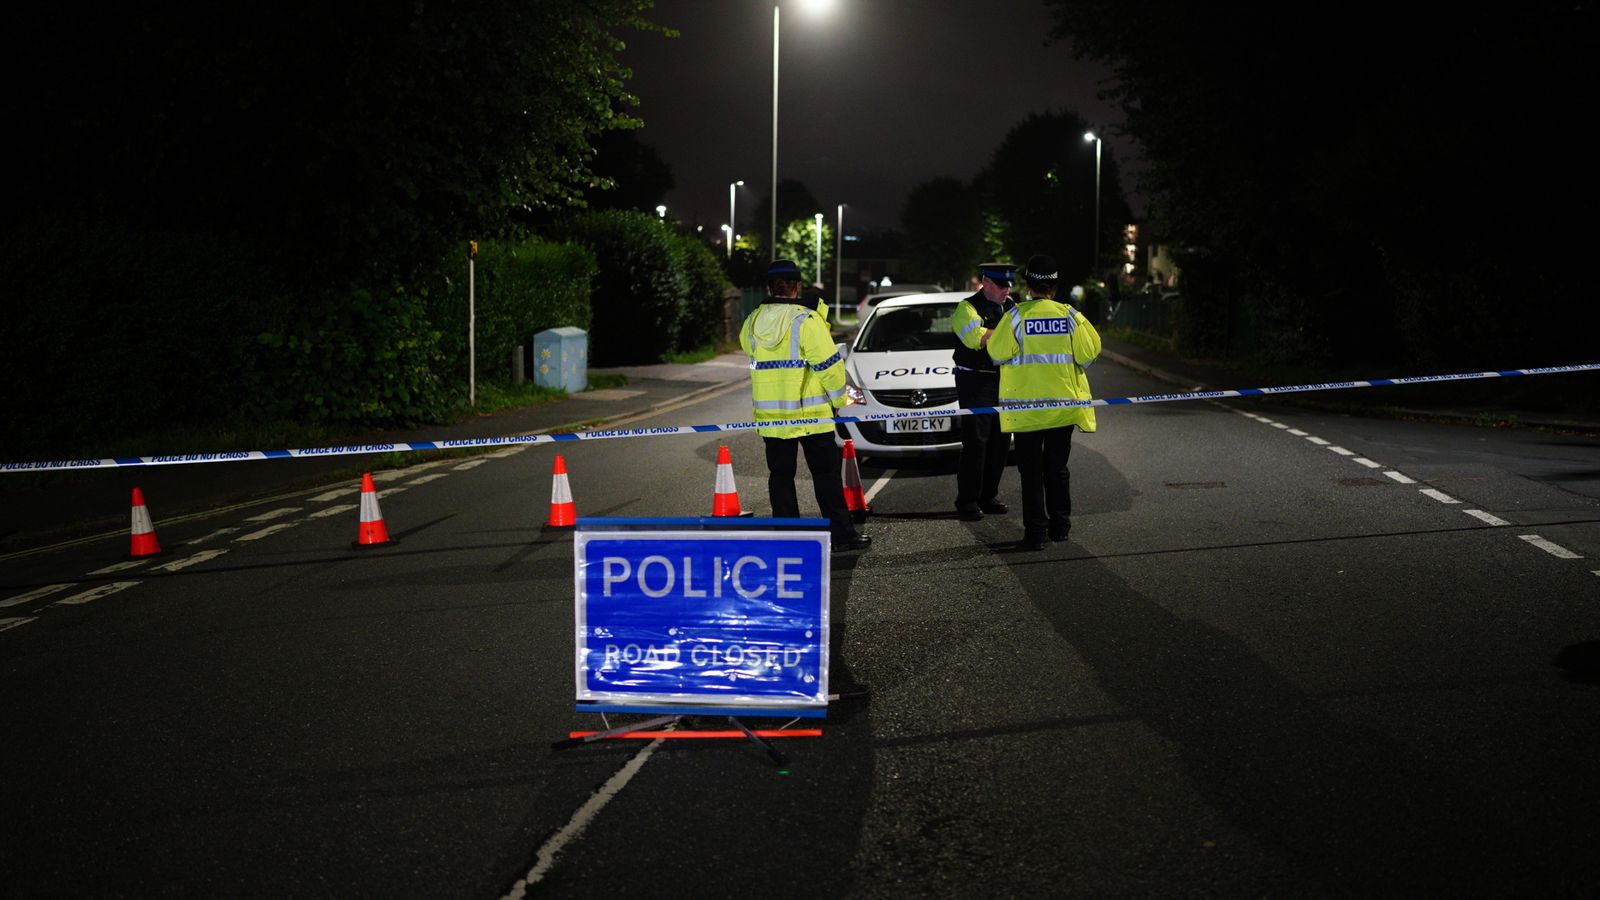 Plymouth shooting: Child among six killed in serious firearms incident, MP says